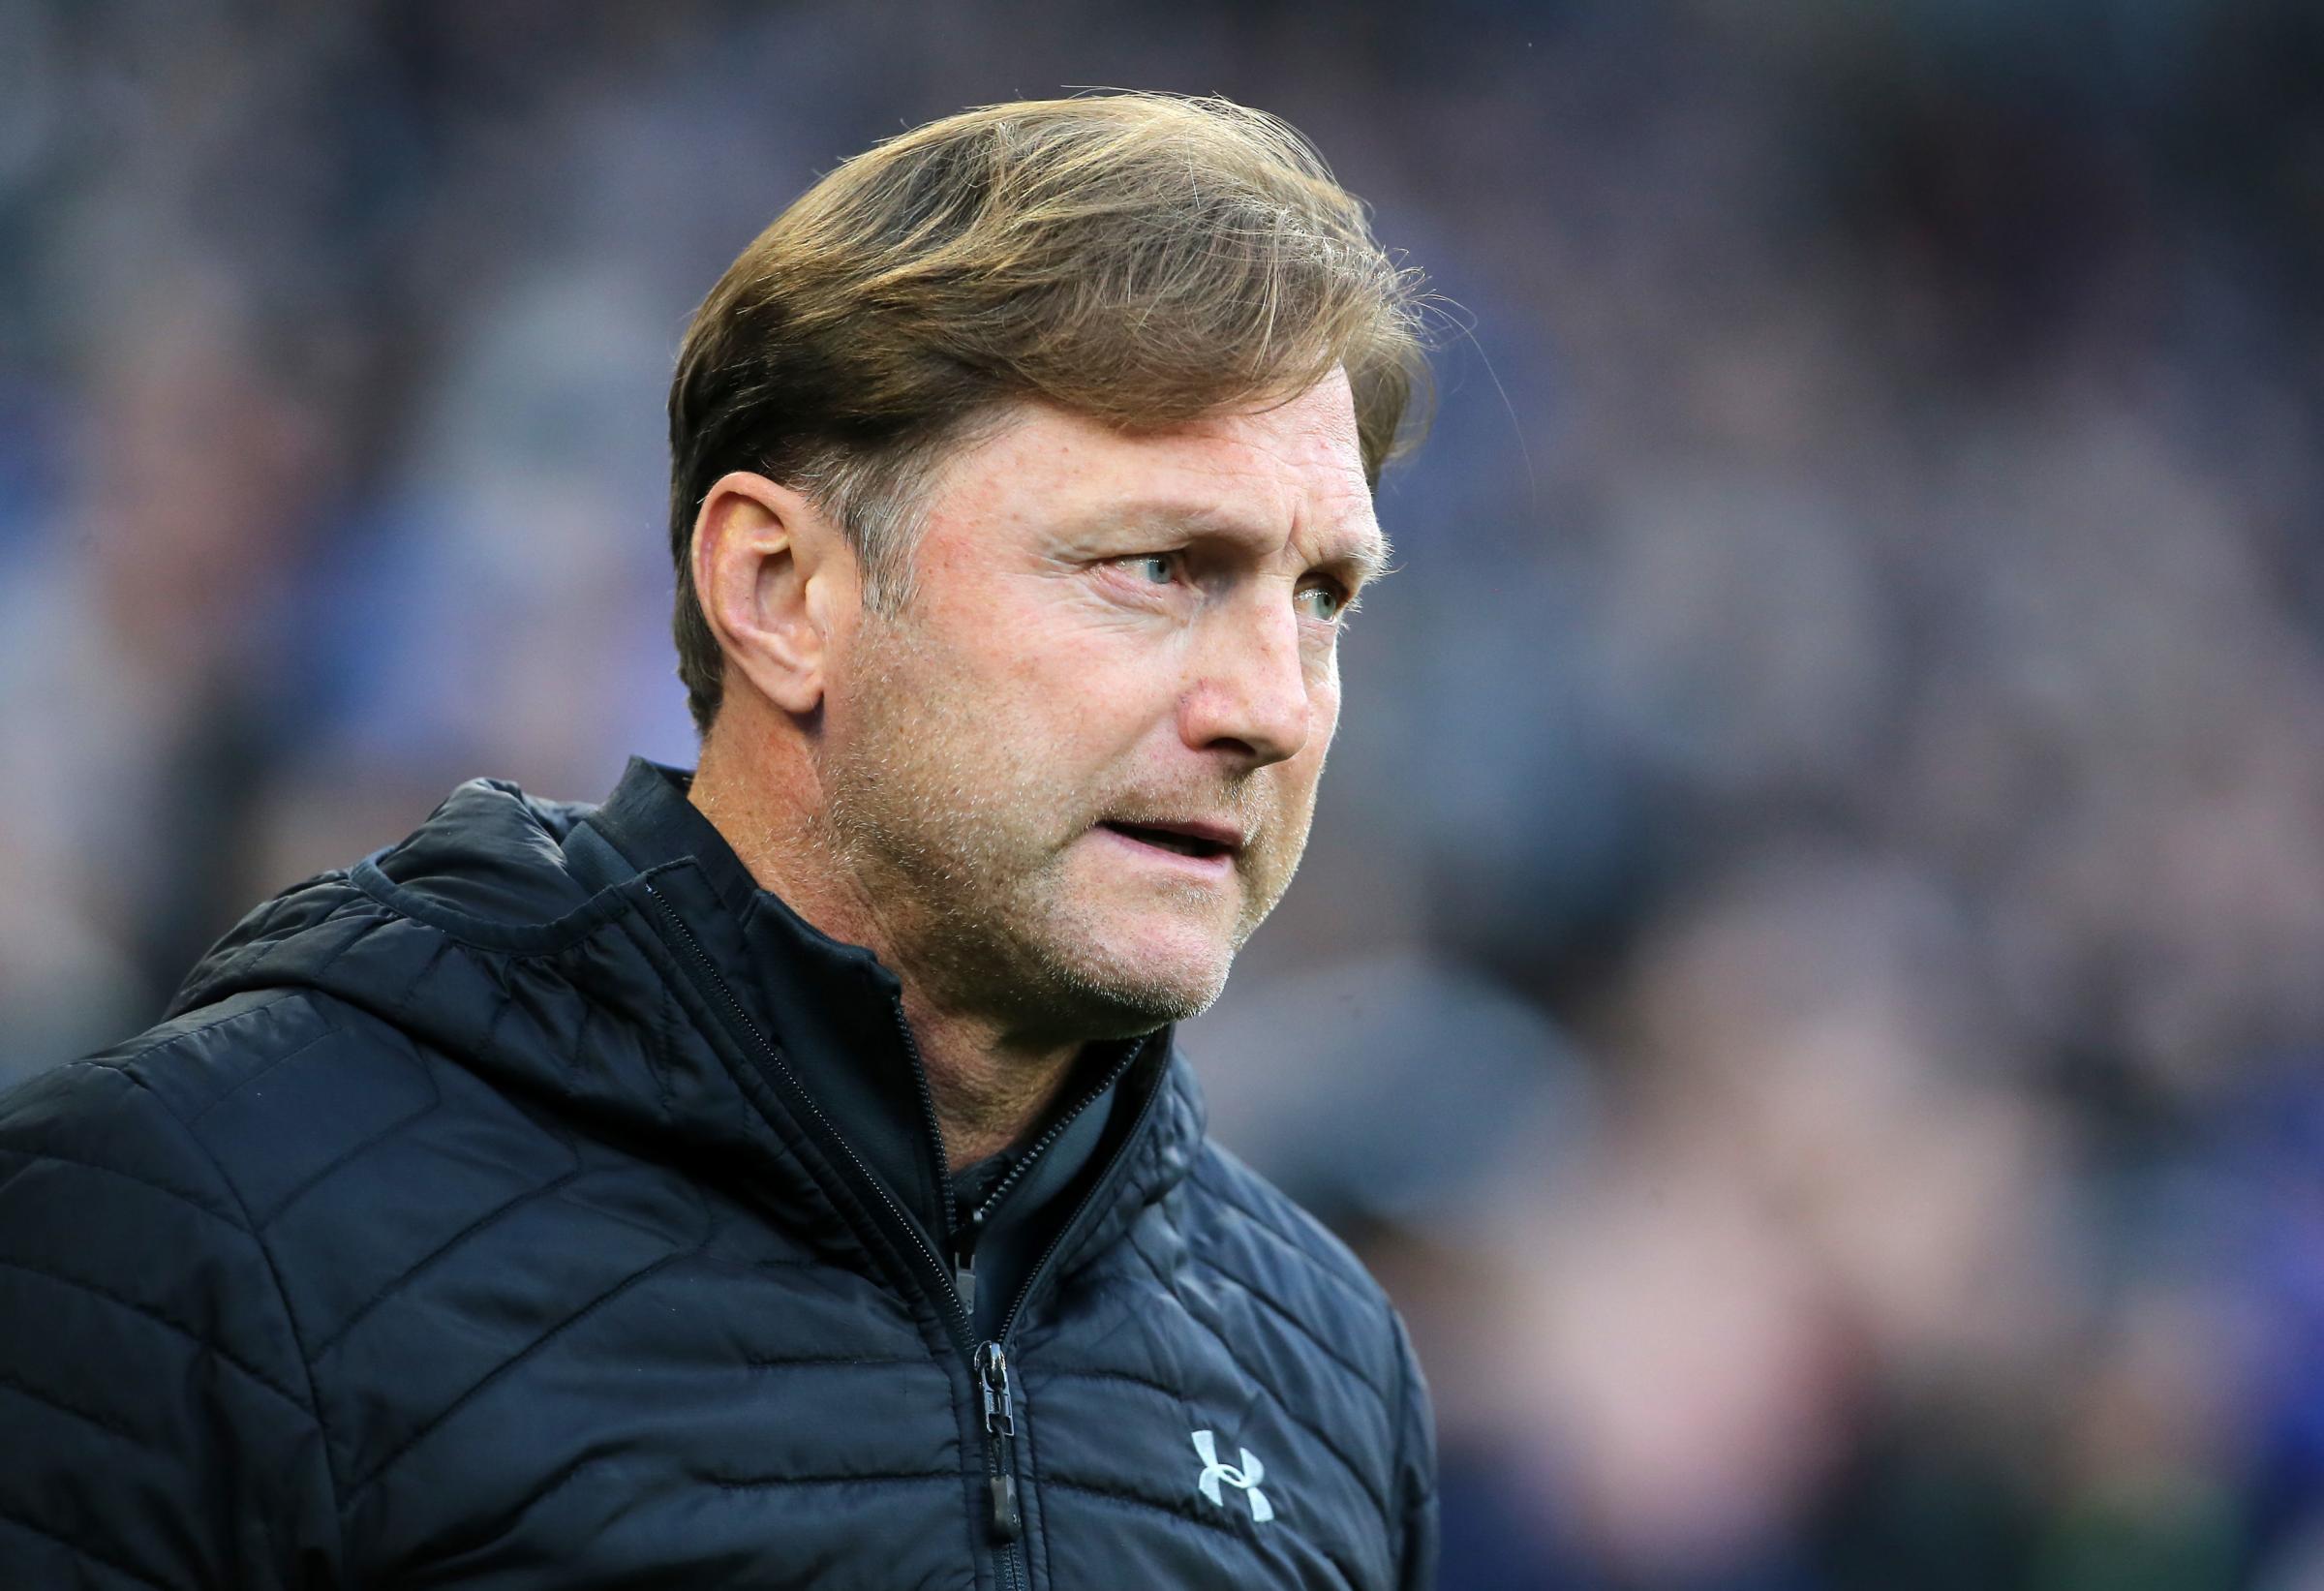 Hasenhuttl: We deserved to be punished for mistakes